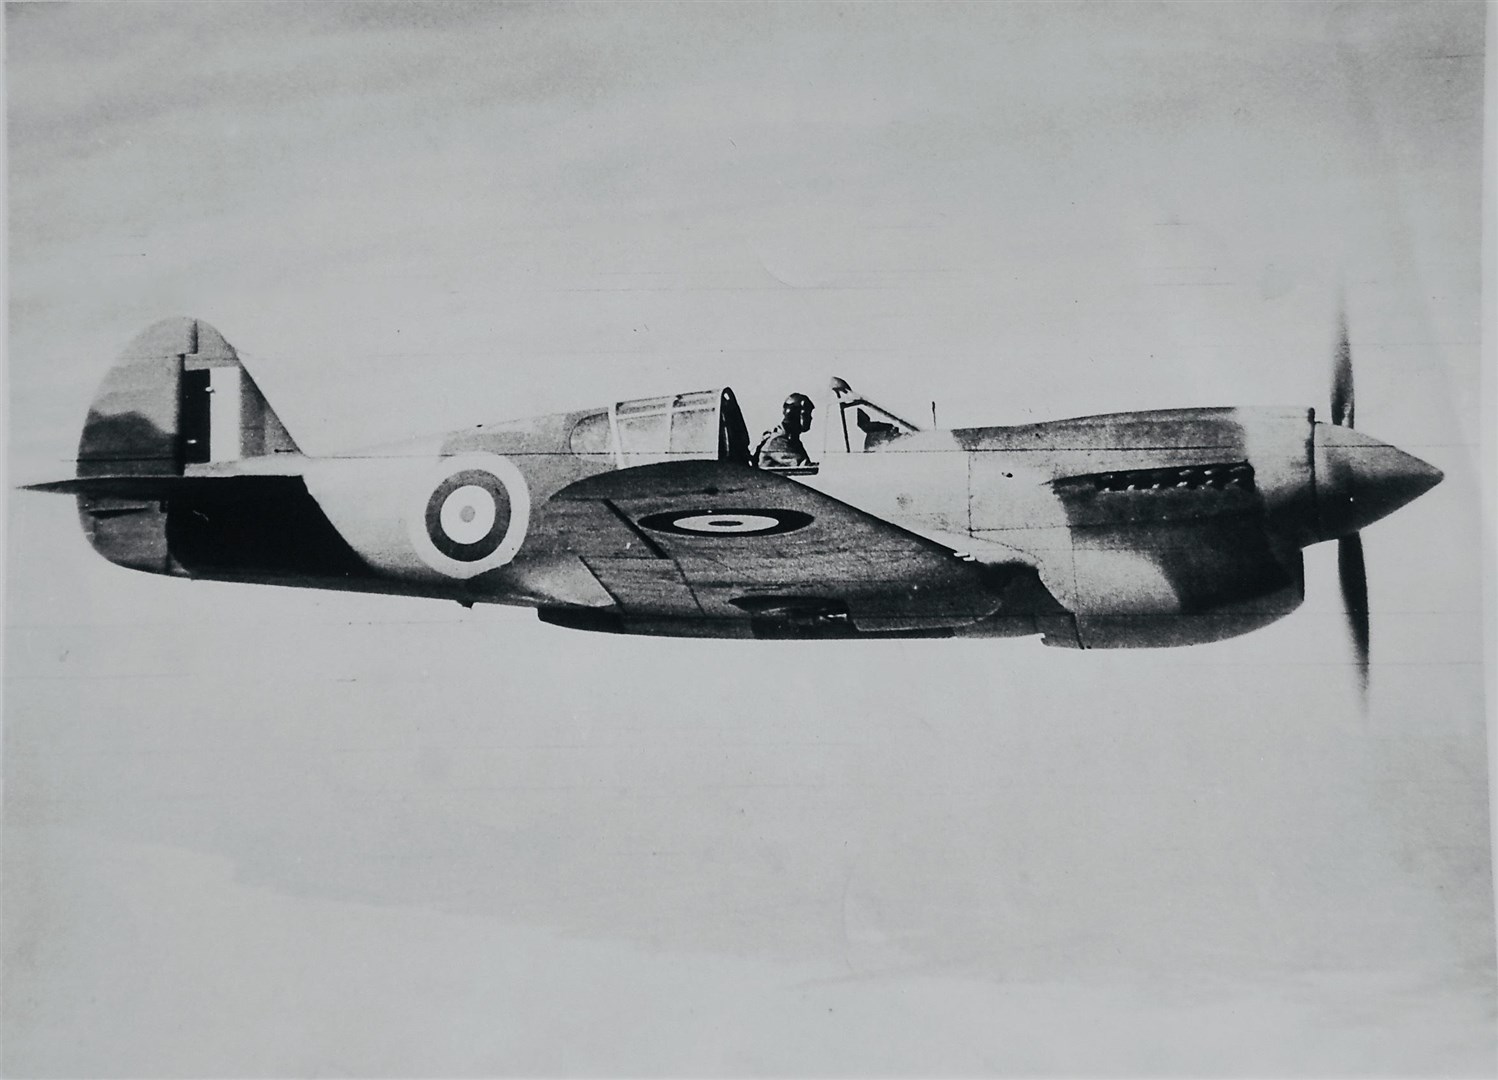 Flt Sgt Ron Chapman flying the Tomahawk fighter plane in December 1941. The plane later crashed in Northern Sudan after running out of fuel. The story of how he survived the crash, losing teeth and gaining an endorsement, is feature in one of the episodes.